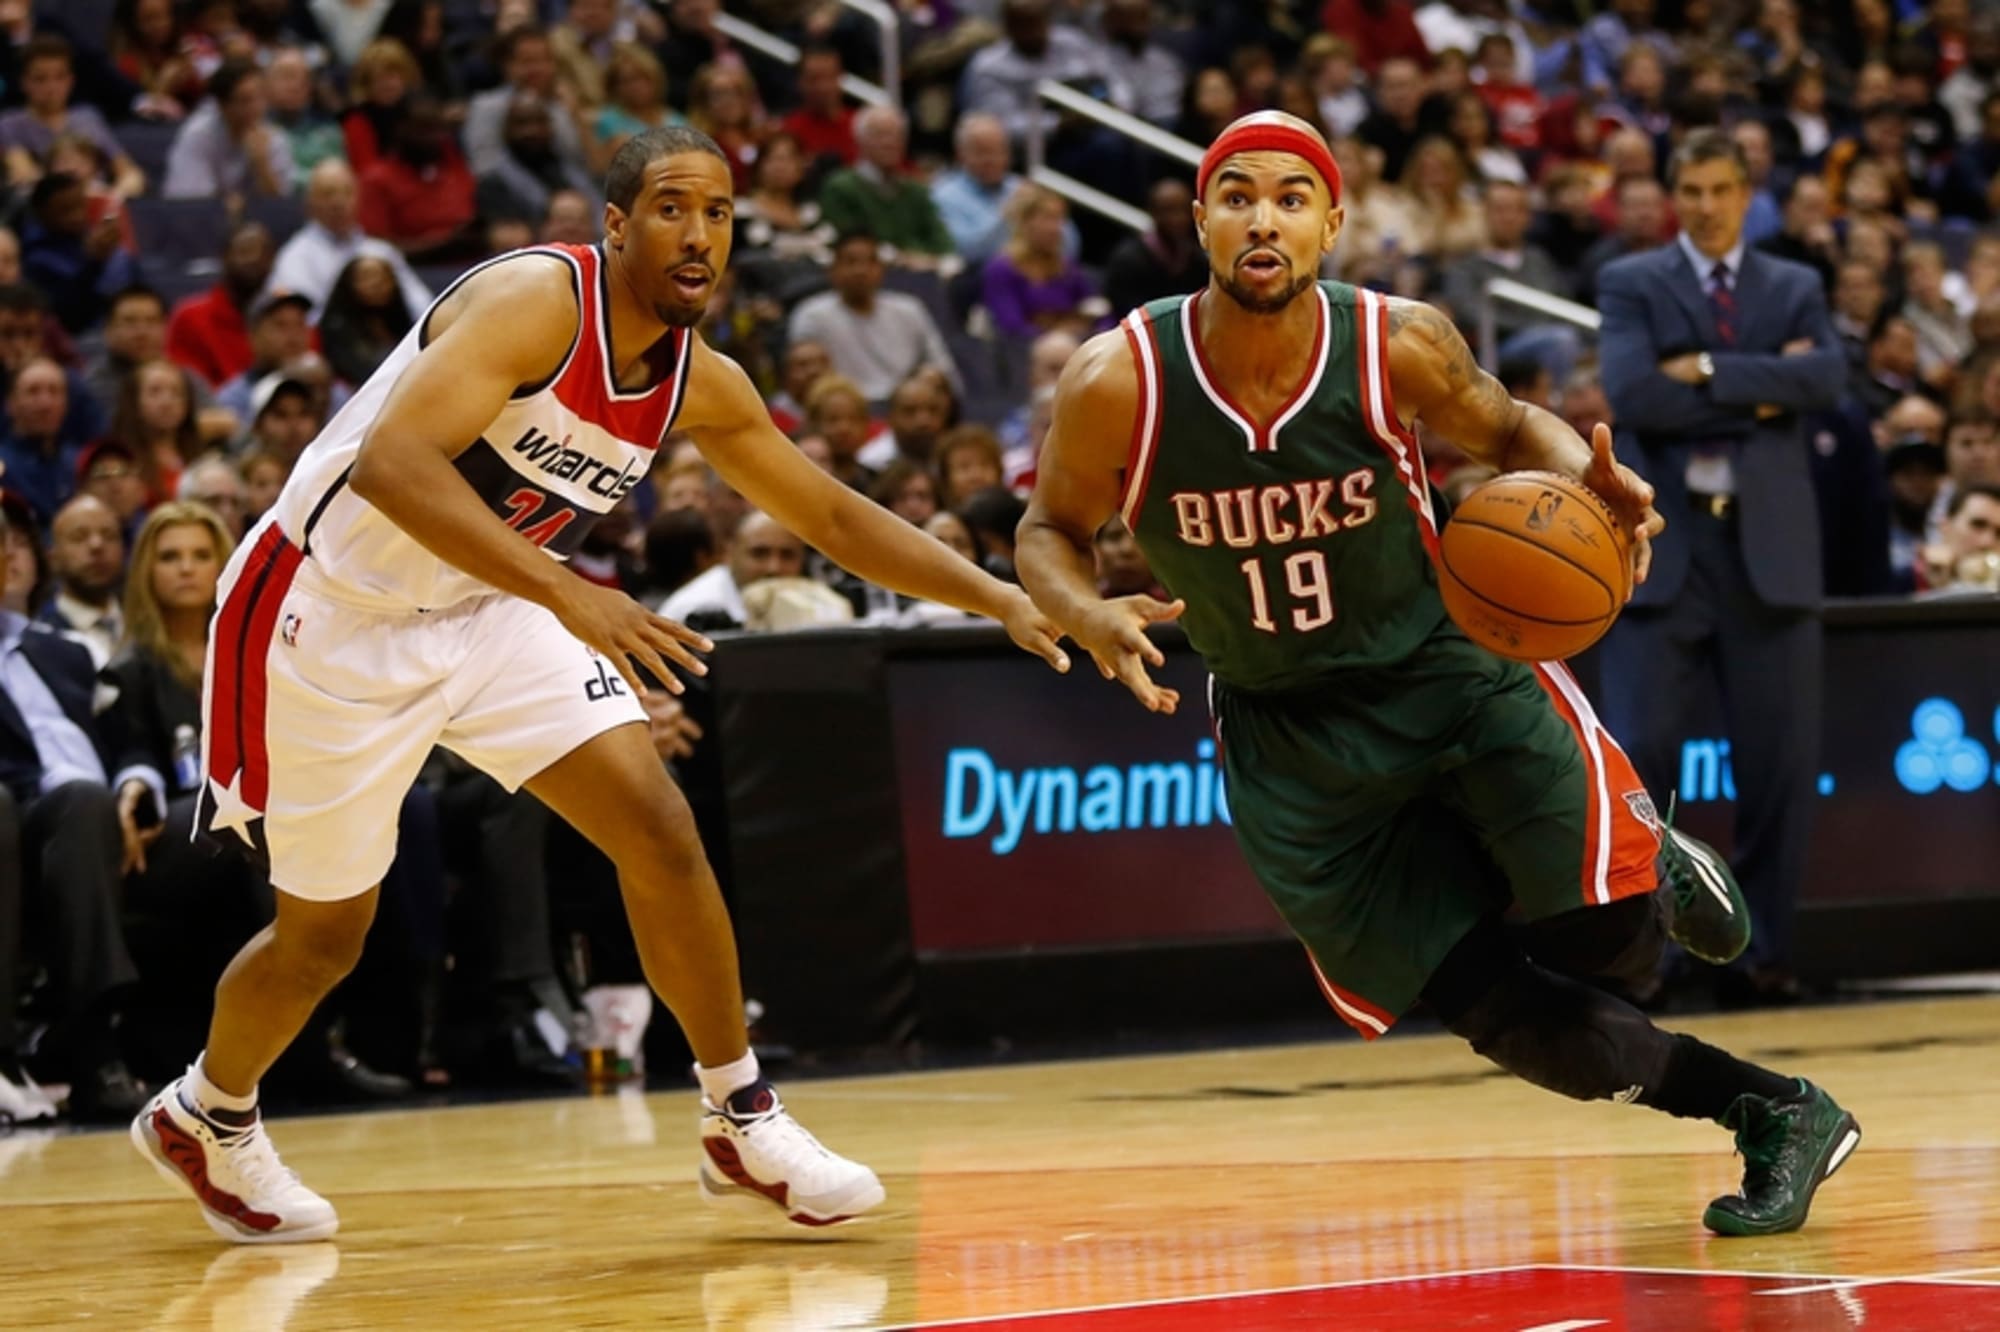 Former NBA guard Mayo signs with unexpected team